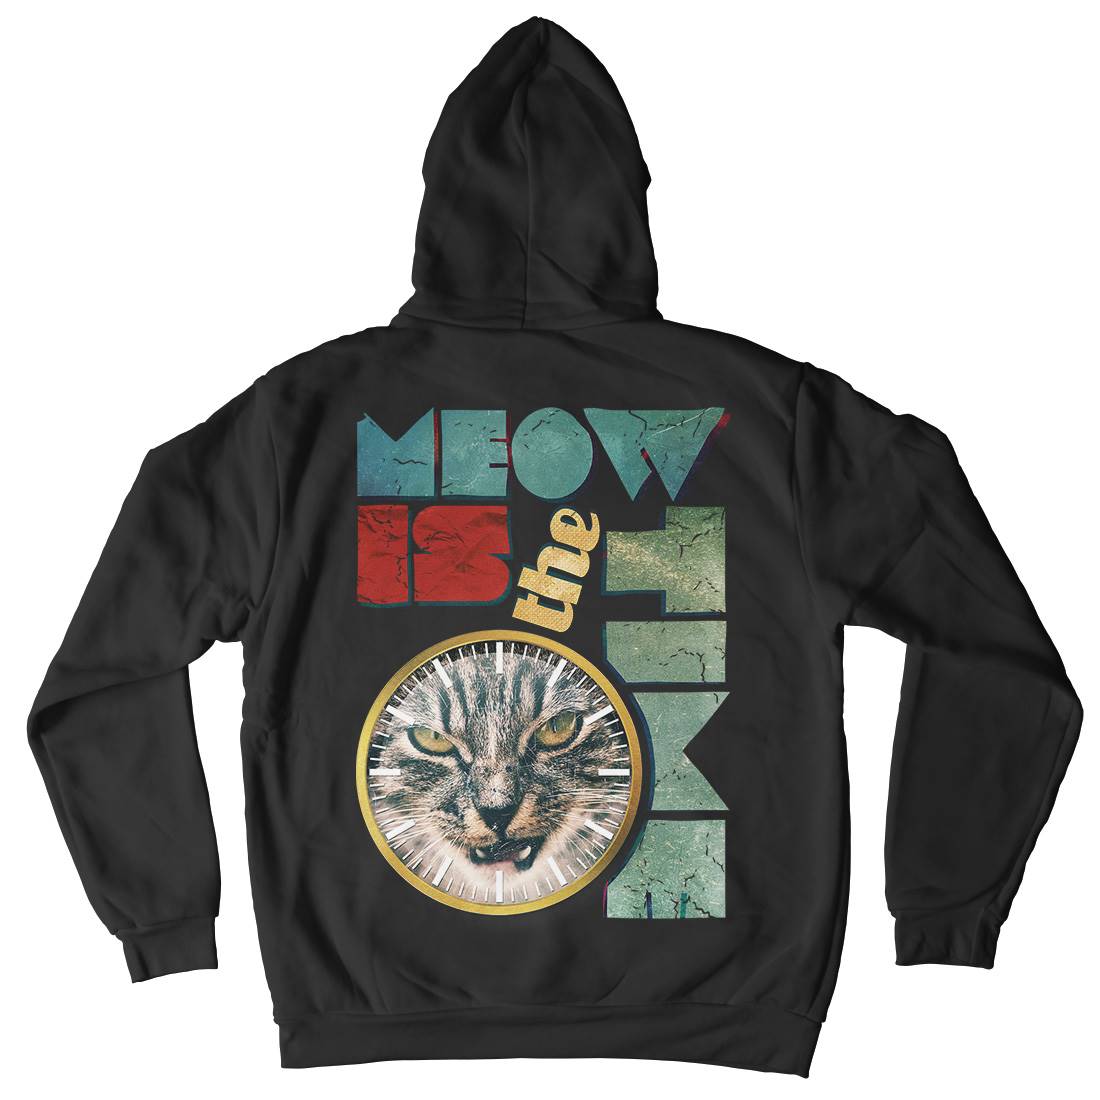 Meow Is The Time Mens Hoodie With Pocket Animals A876